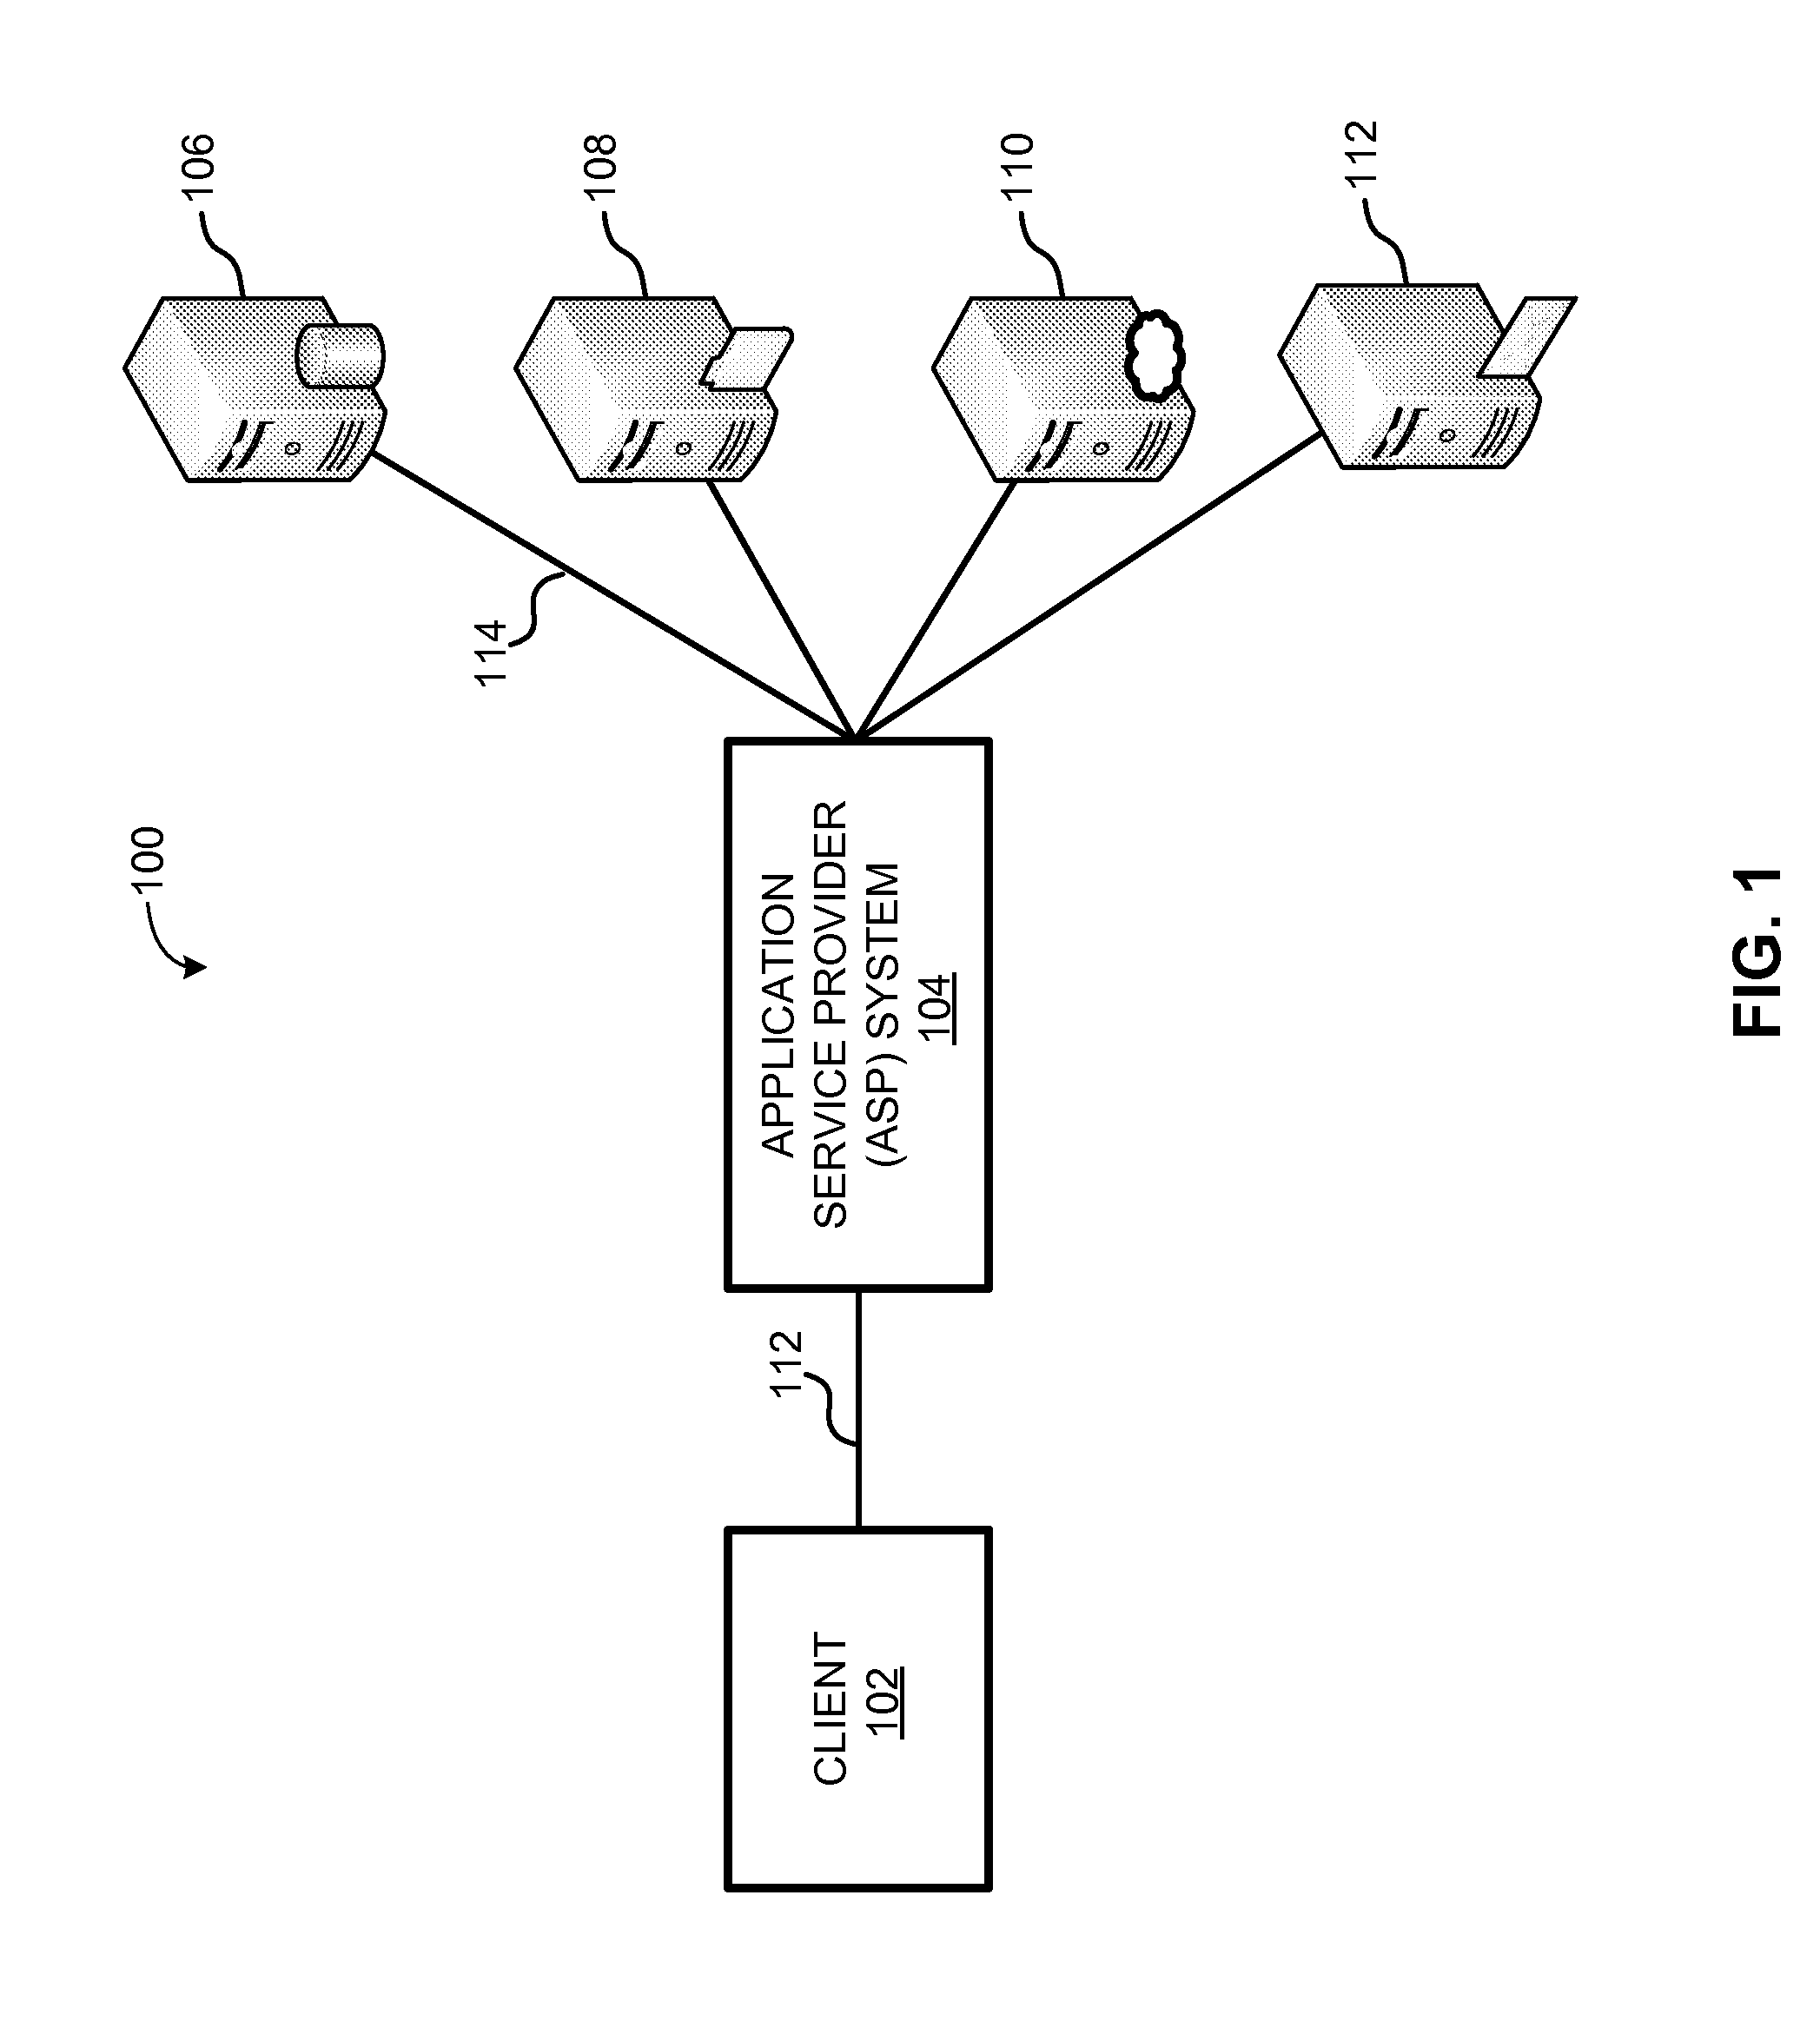 Systems and methods for supporting social productivity using thresholding